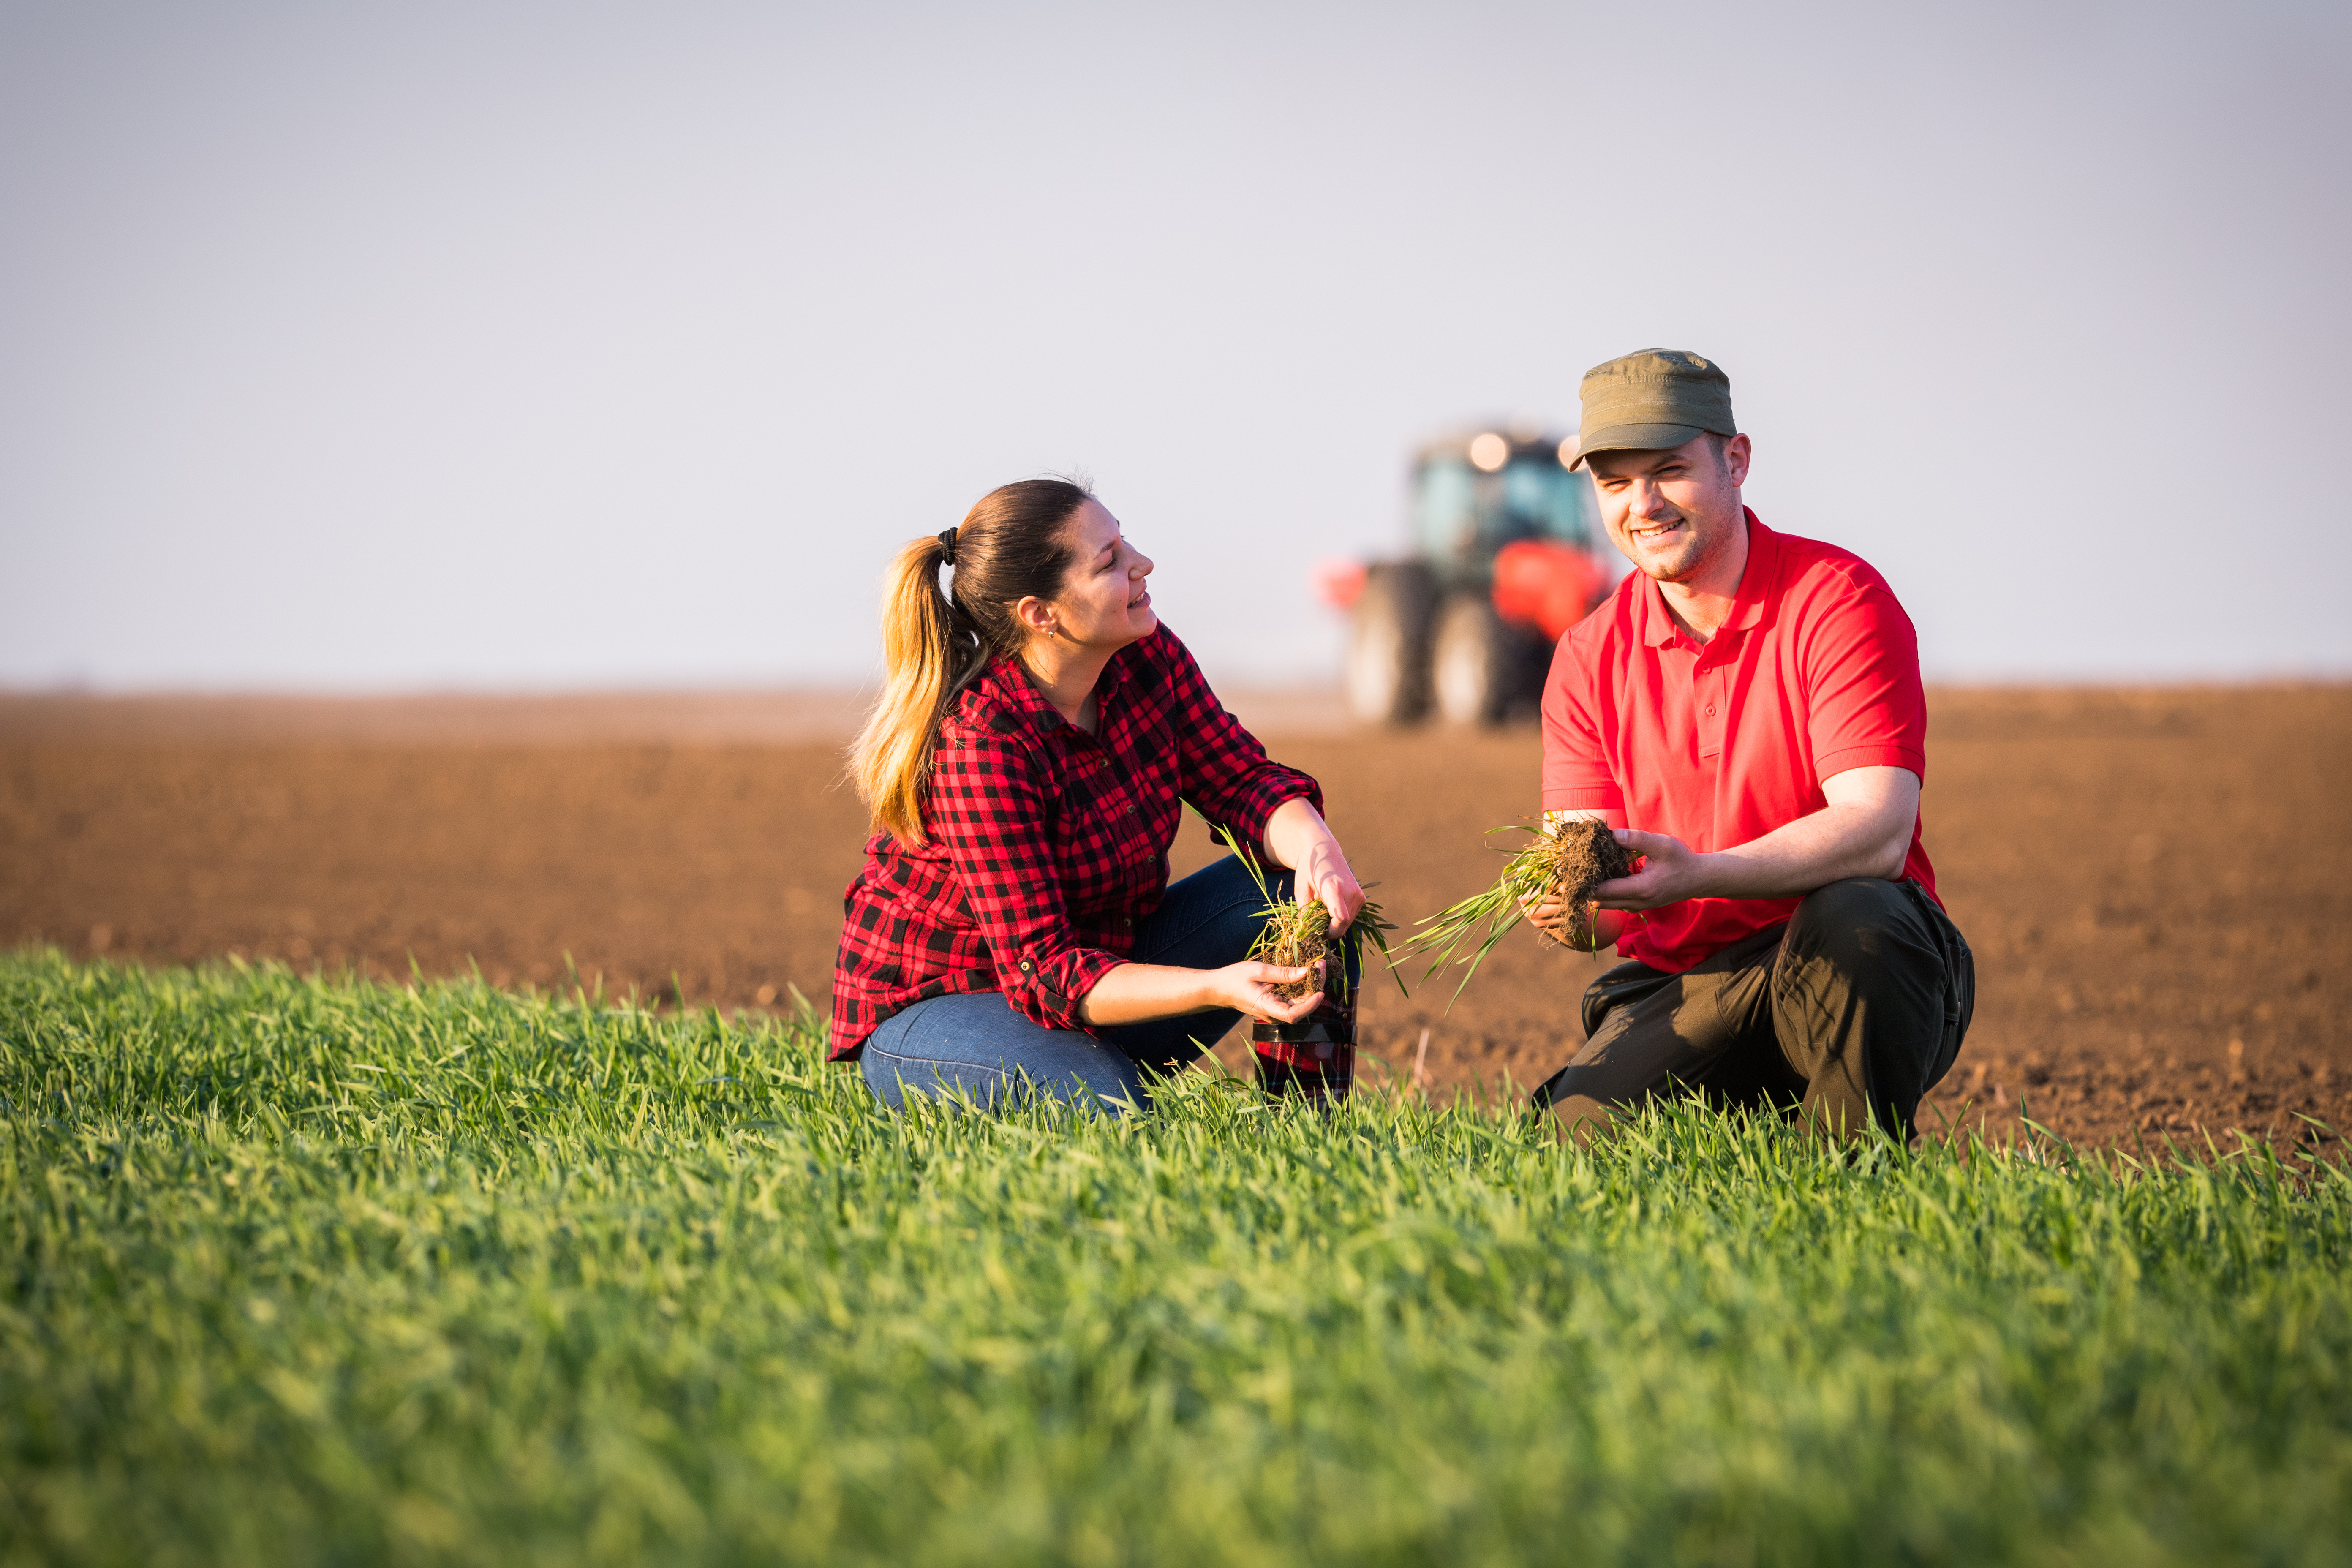 Two people inspecting crops in a ploughed field